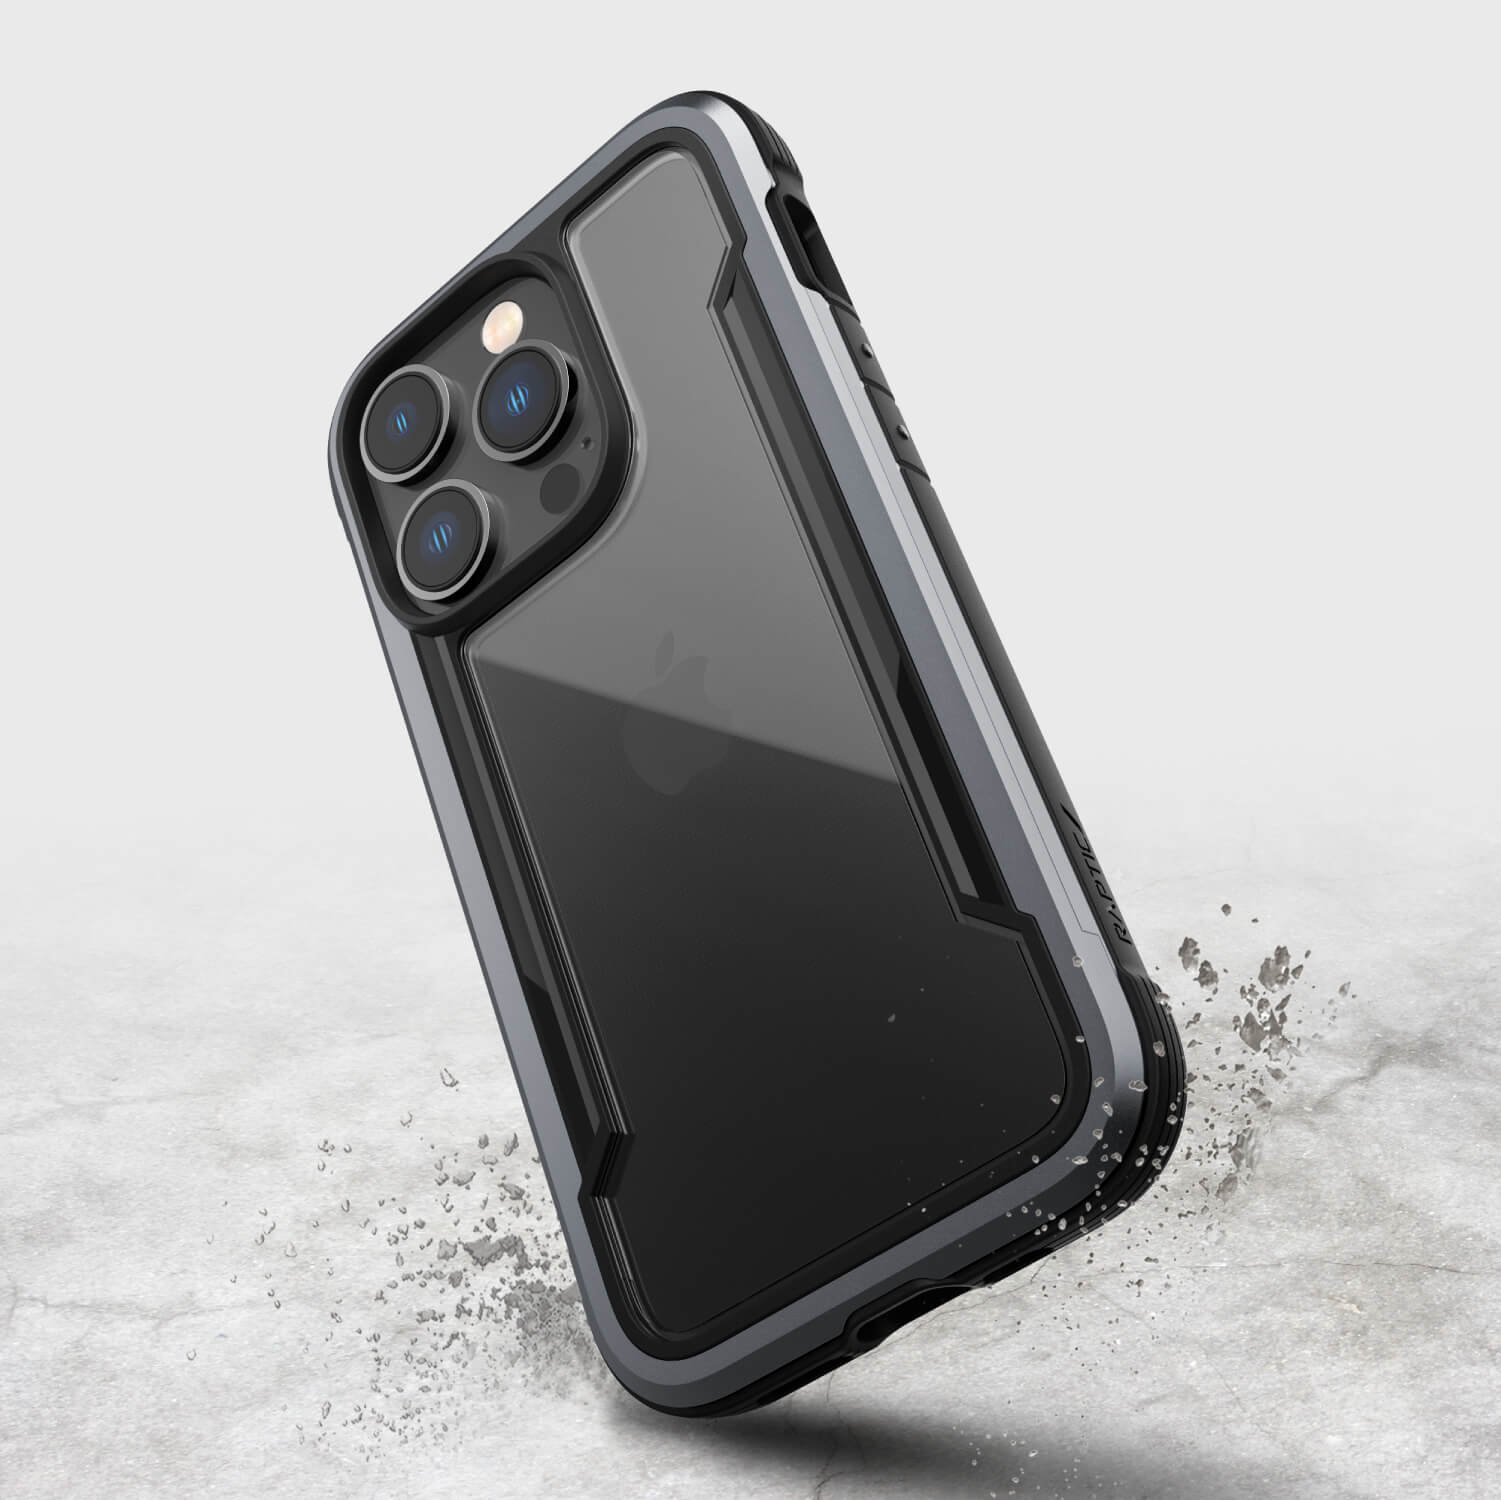 The Raptic iPhone 14 Pro case - Shield is displayed on a concrete surface, featuring MagSafe compatibility.